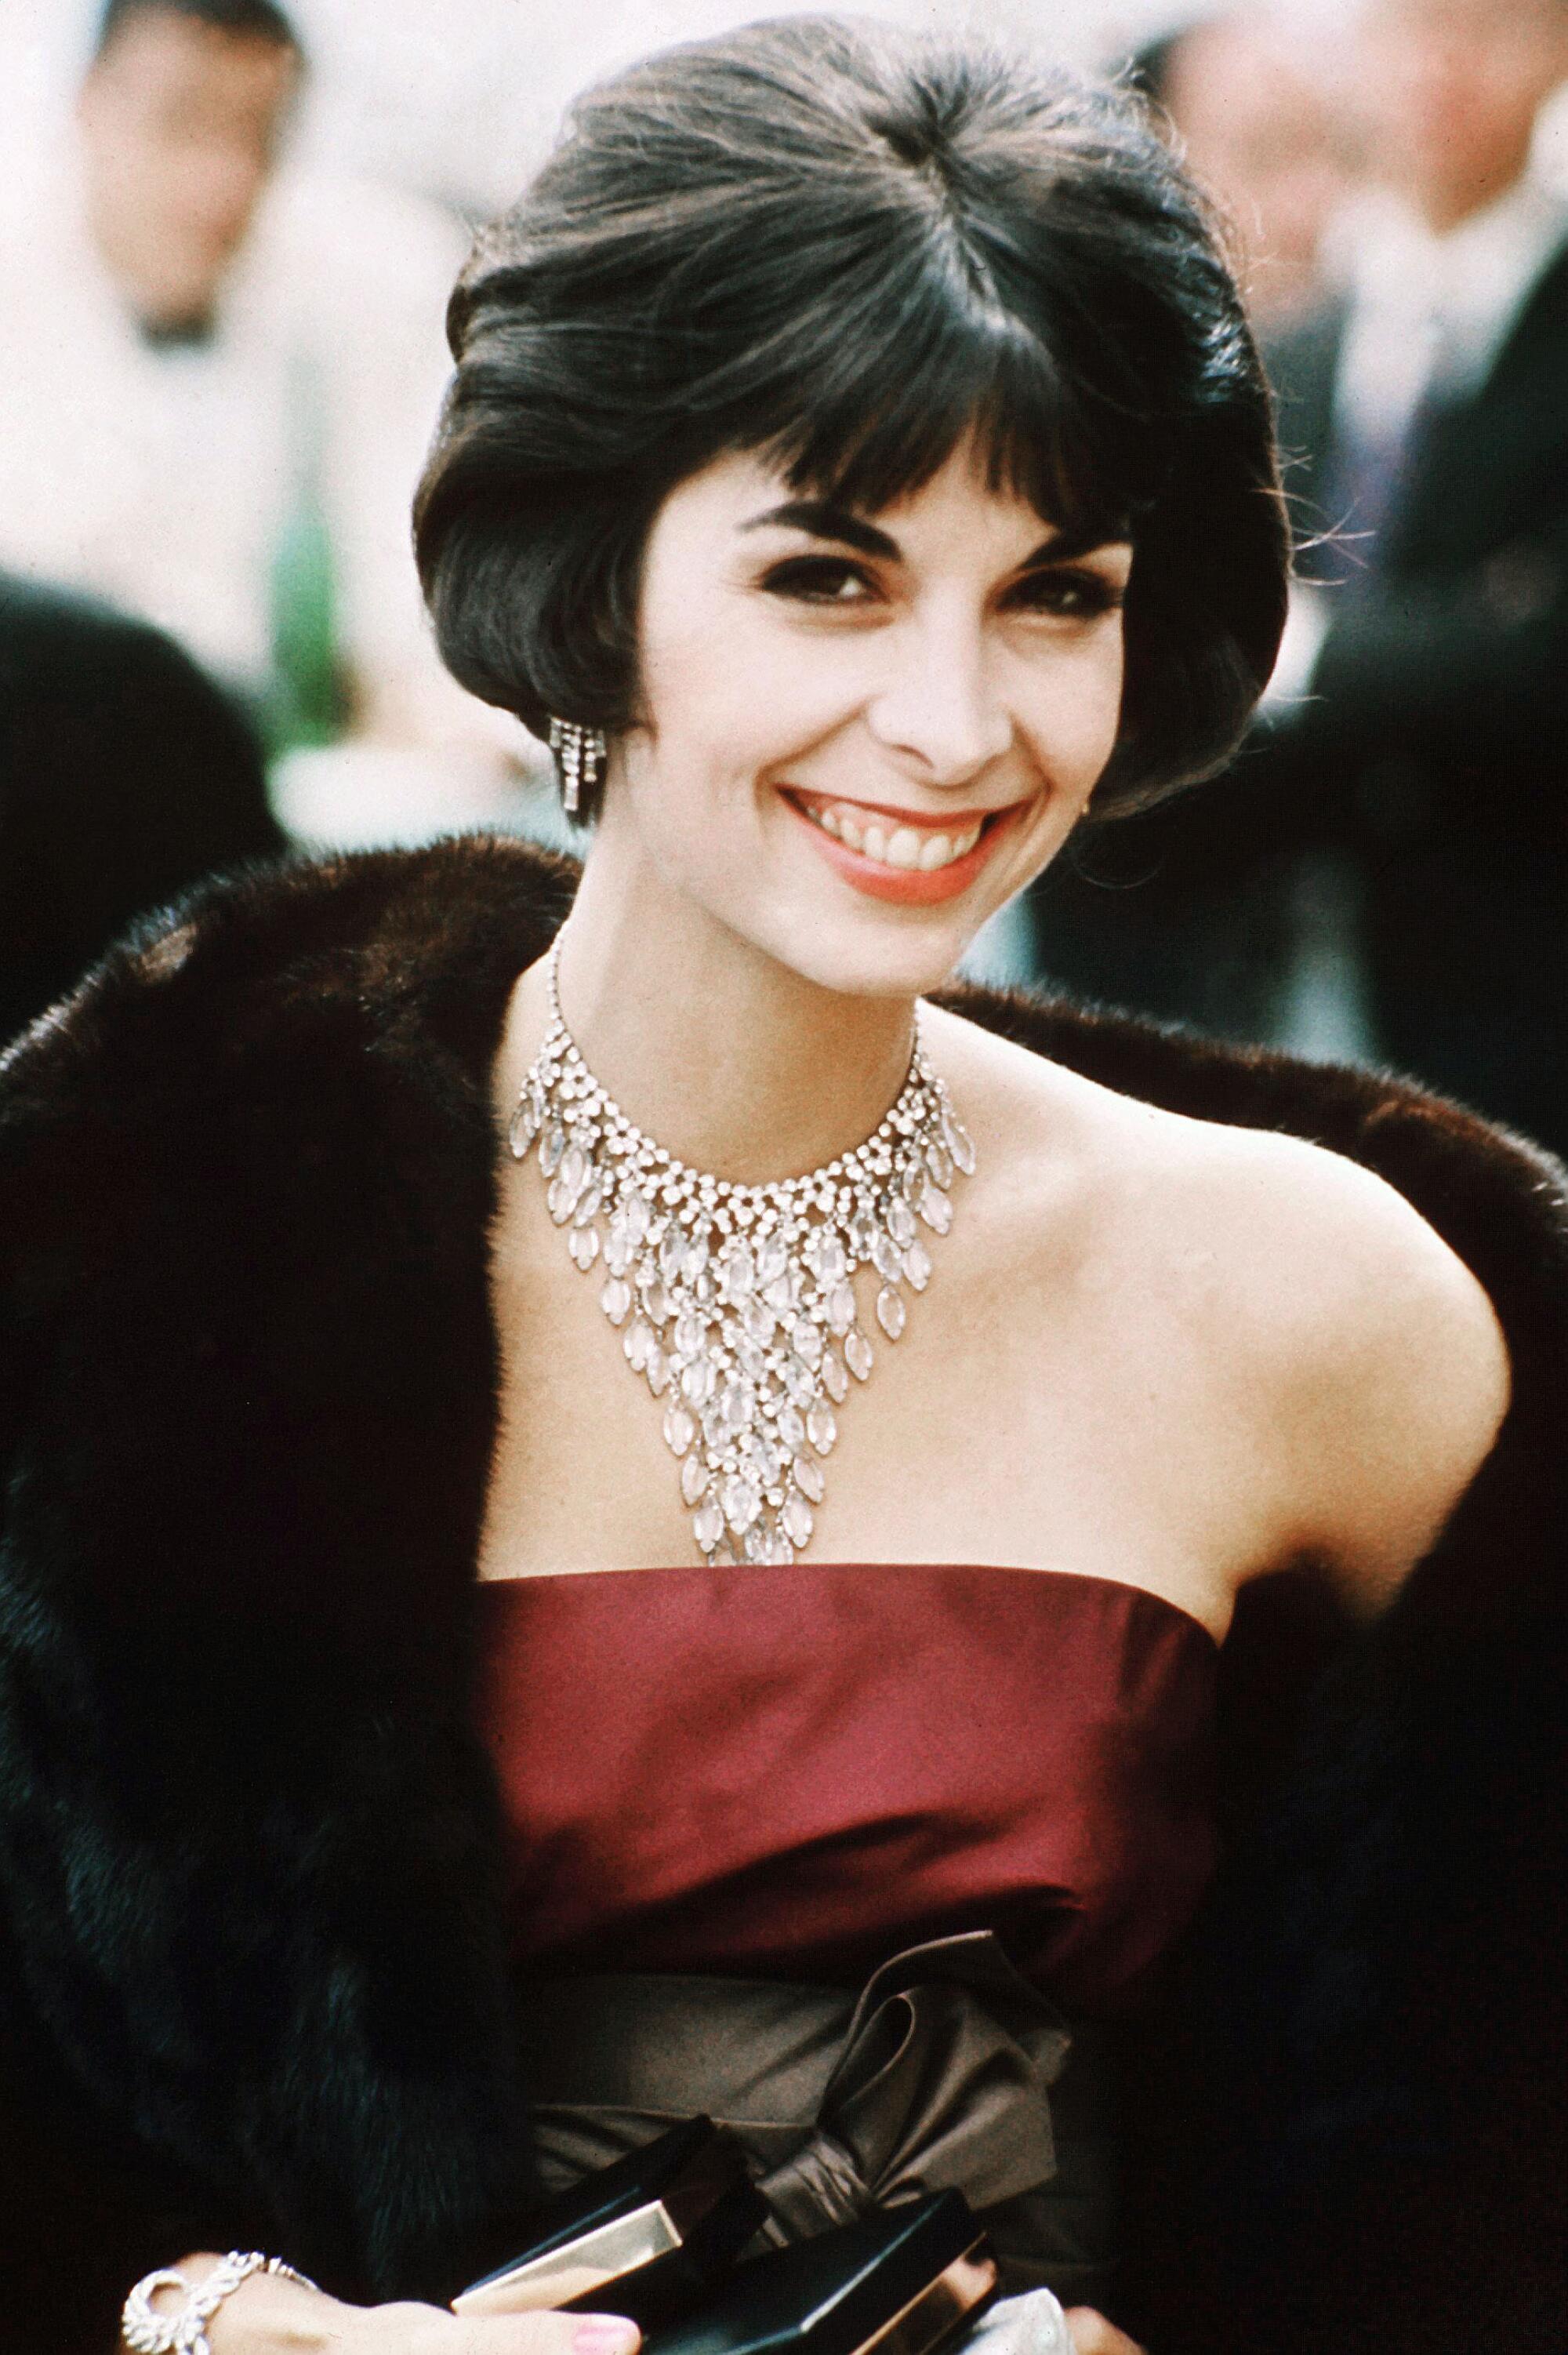 Talia Shire wears a huge necklace in "The Godfather Part II."